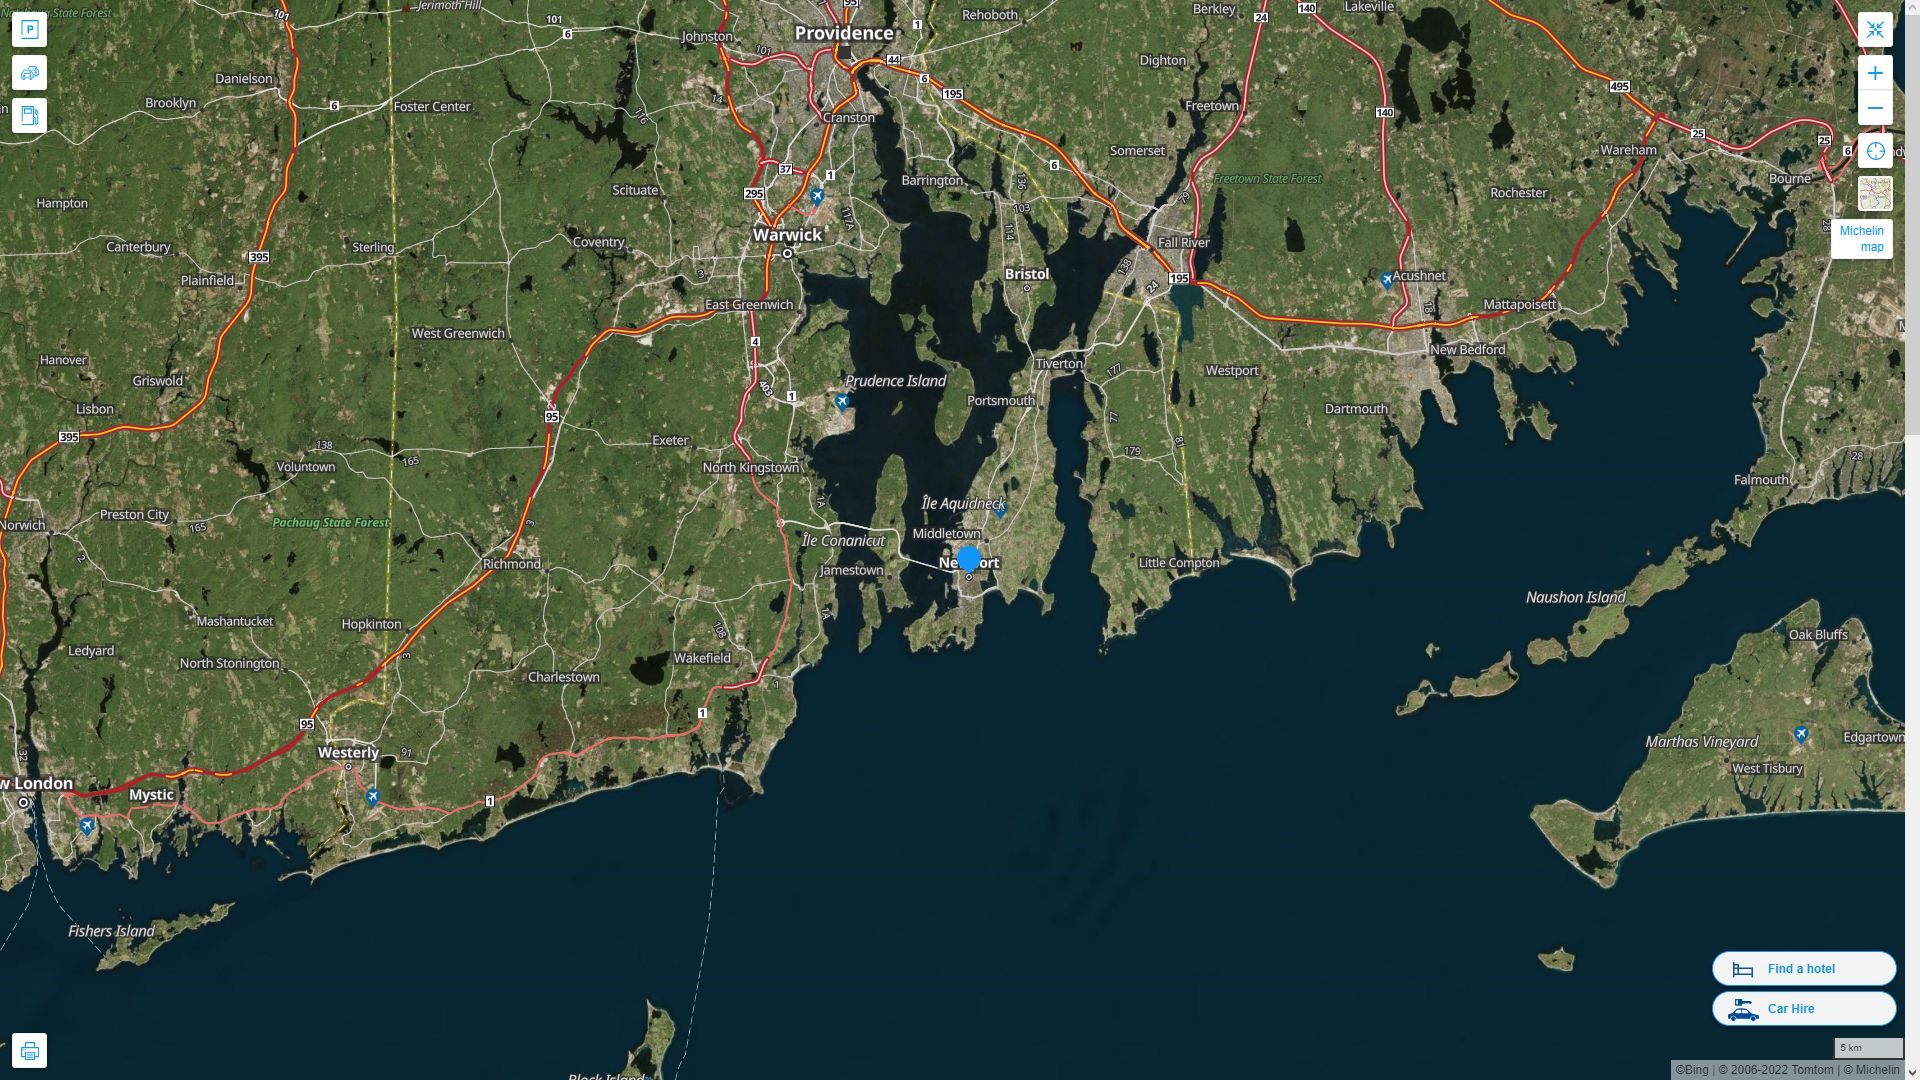 Newport Rhode Island Highway and Road Map with Satellite View